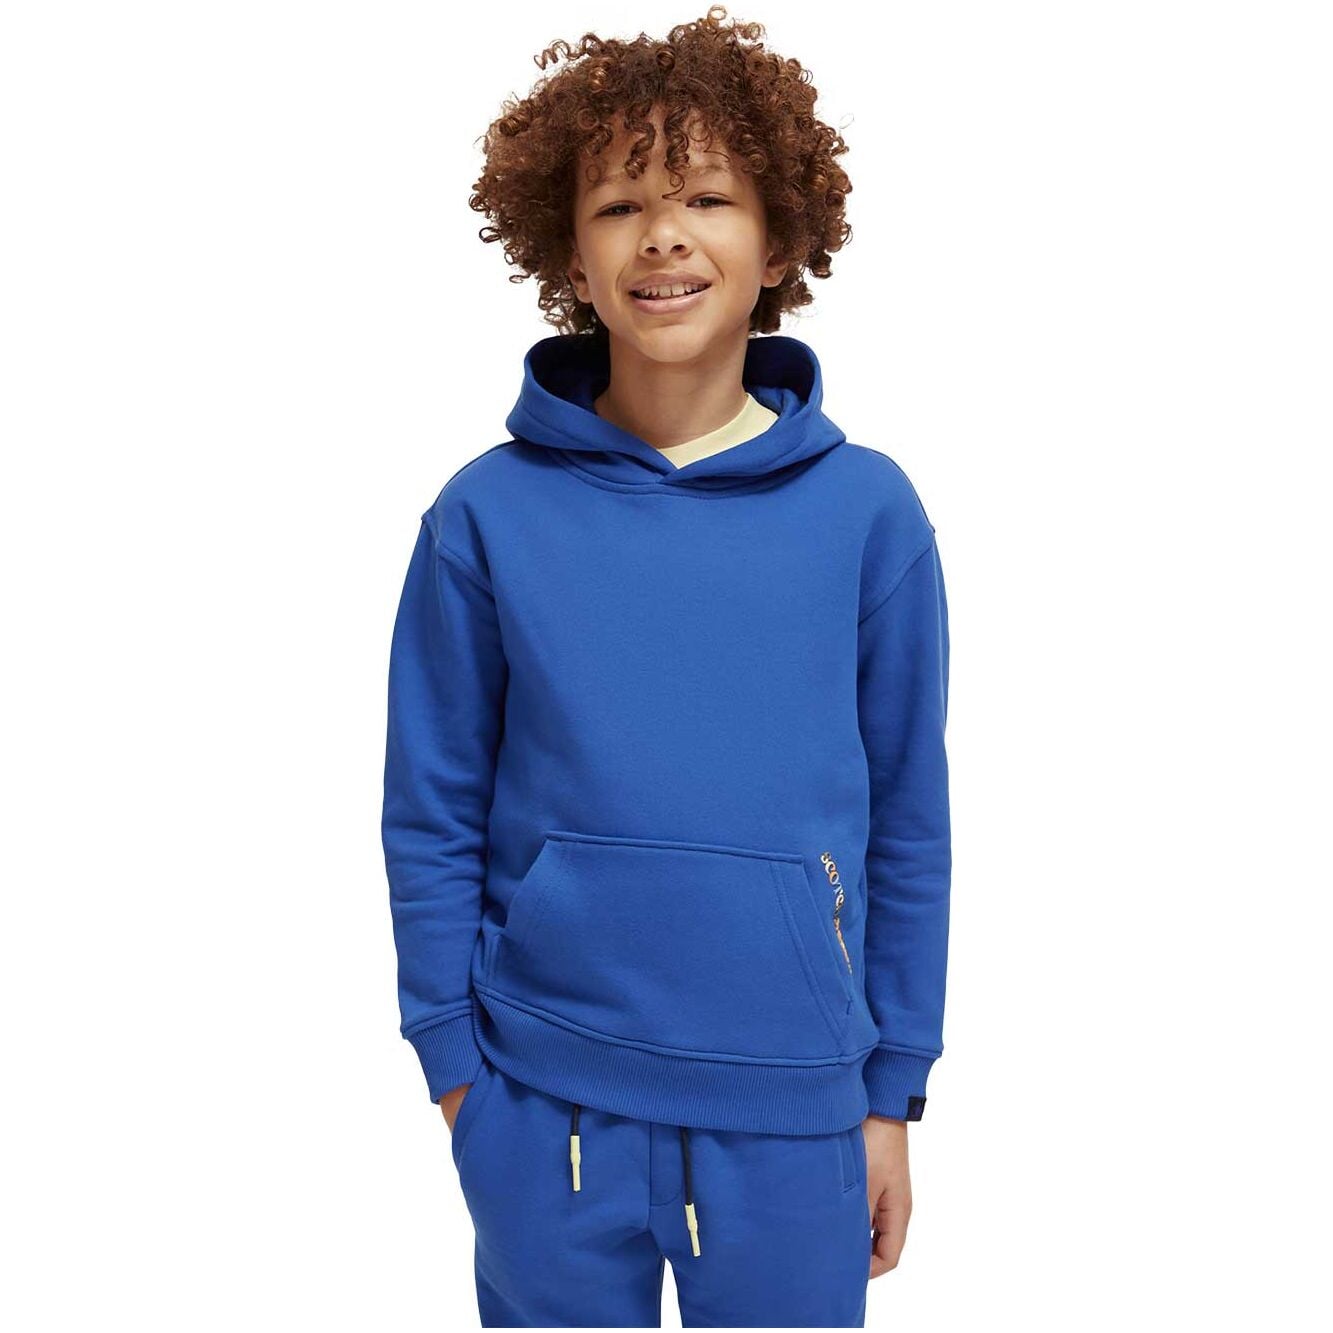 Relaxed-Fit Hoodie - Cobalt